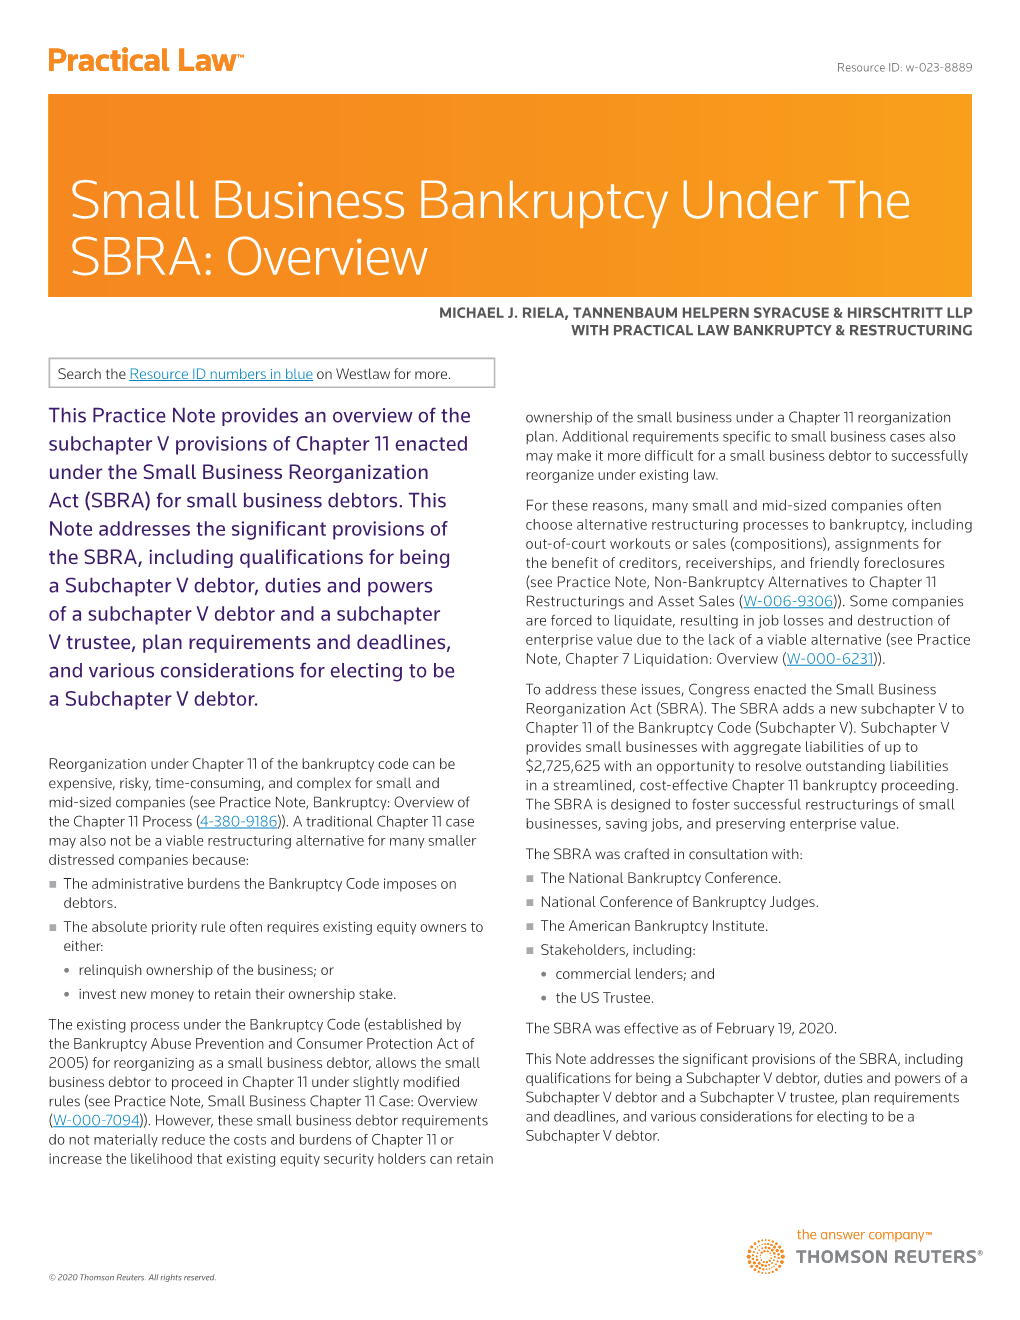 Small Business Bankruptcy Under the SBRA: Overview